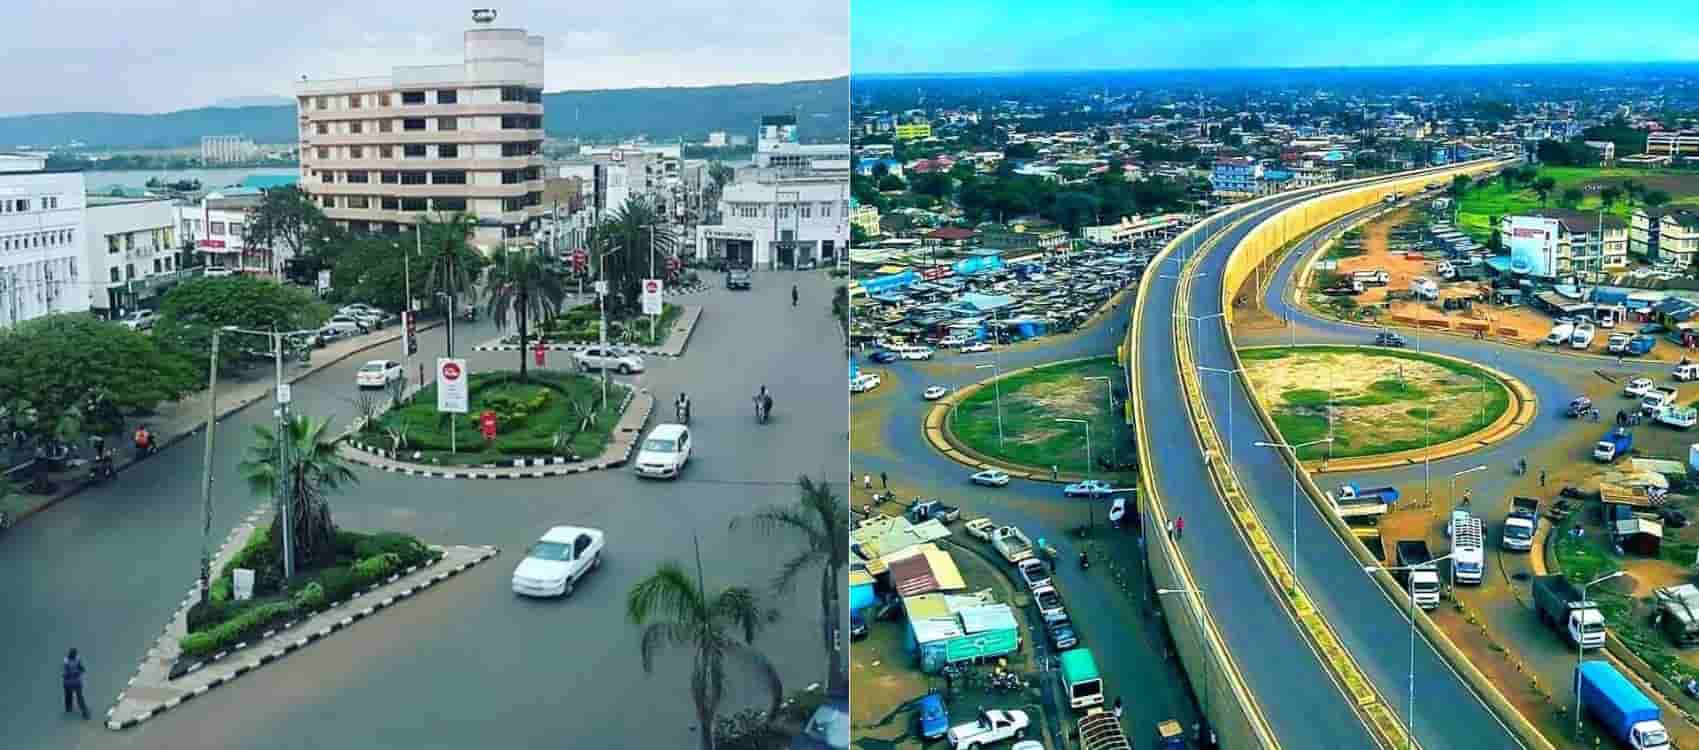 How August 2022 Elections in Kenya will Impact Real Estate Market in Kisumu